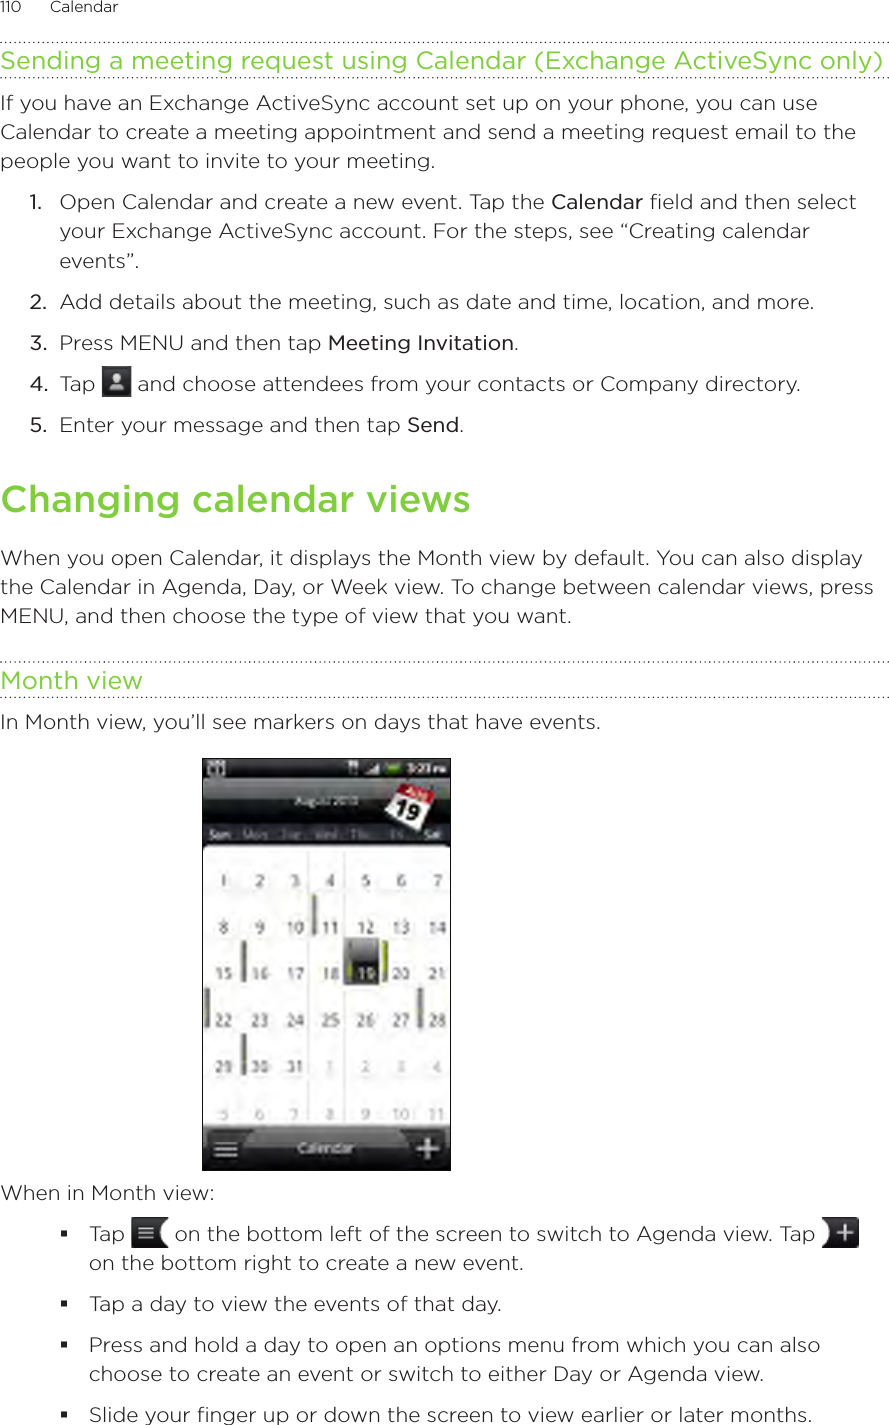 110      Calendar      Sending a meeting request using Calendar (Exchange ActiveSync only)If you have an Exchange ActiveSync account set up on your phone, you can use Calendar to create a meeting appointment and send a meeting request email to the people you want to invite to your meeting.1.  Open Calendar and create a new event. Tap the Calendar field and then select your Exchange ActiveSync account. For the steps, see “Creating calendar events”.2.  Add details about the meeting, such as date and time, location, and more.3.  Press MENU and then tap Meeting Invitation.4.  Tap   and choose attendees from your contacts or Company directory.5.  Enter your message and then tap Send.Changing calendar viewsWhen you open Calendar, it displays the Month view by default. You can also display the Calendar in Agenda, Day, or Week view. To change between calendar views, press MENU, and then choose the type of view that you want.Month viewIn Month view, you’ll see markers on days that have events.When in Month view:Tap   on the bottom left of the screen to switch to Agenda view. Tap   on the bottom right to create a new event.Tap a day to view the events of that day.Press and hold a day to open an options menu from which you can also choose to create an event or switch to either Day or Agenda view.Slide your finger up or down the screen to view earlier or later months.